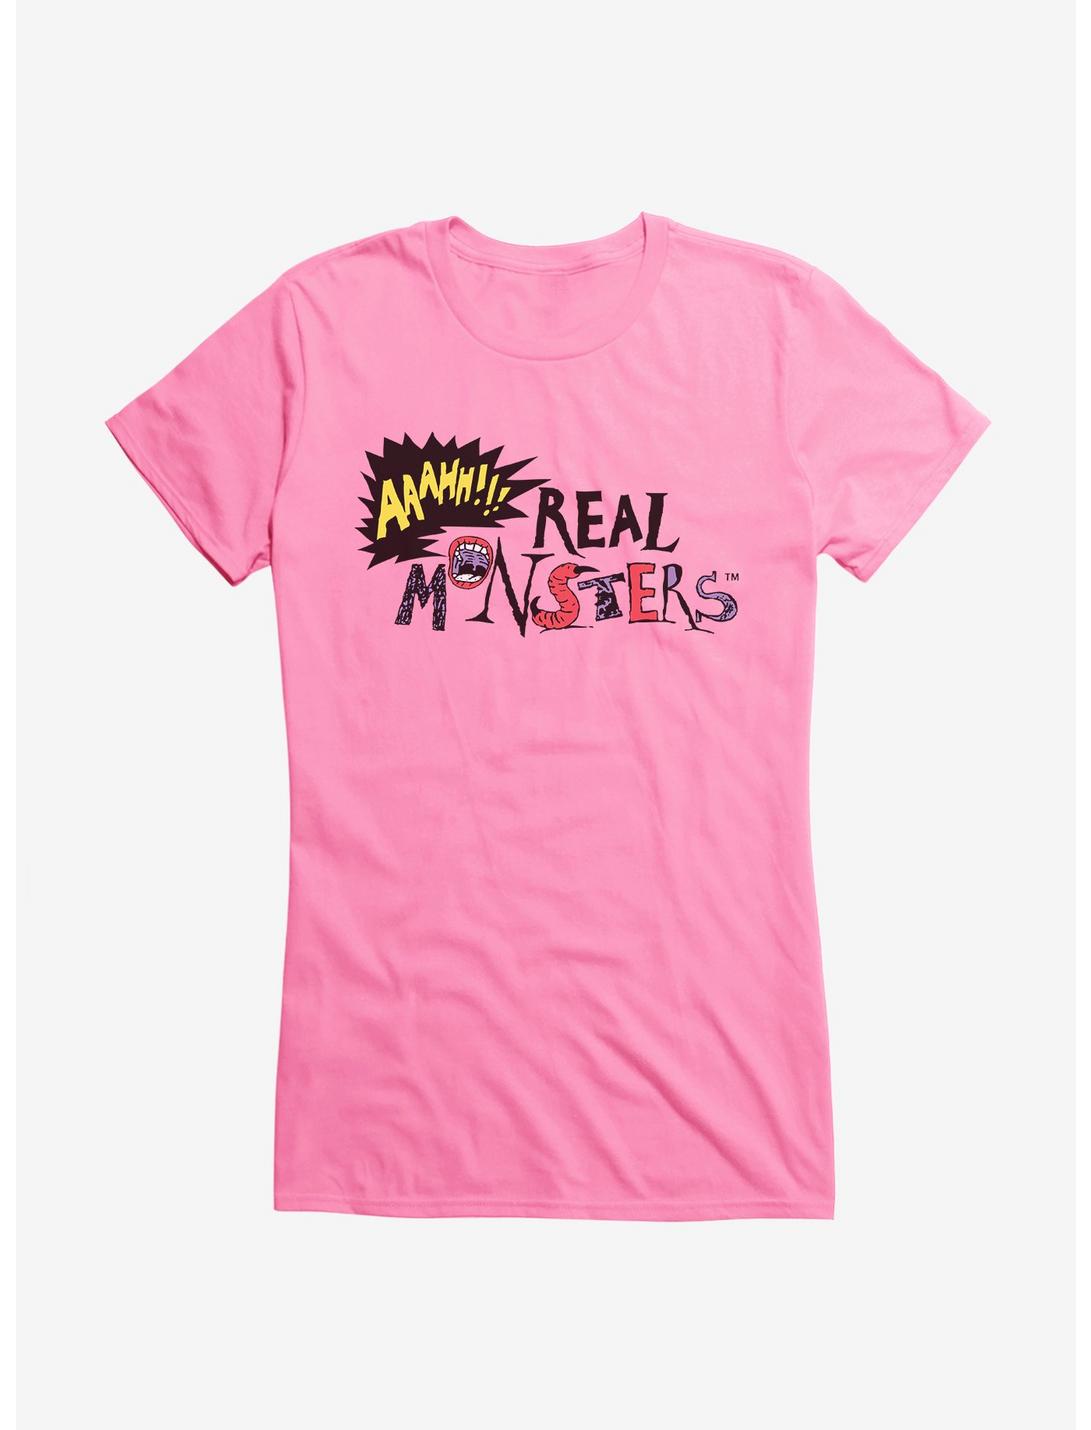 Aaahh!!! Real Monsters Logo Girls T-Shirt, CHARITY PINK, hi-res